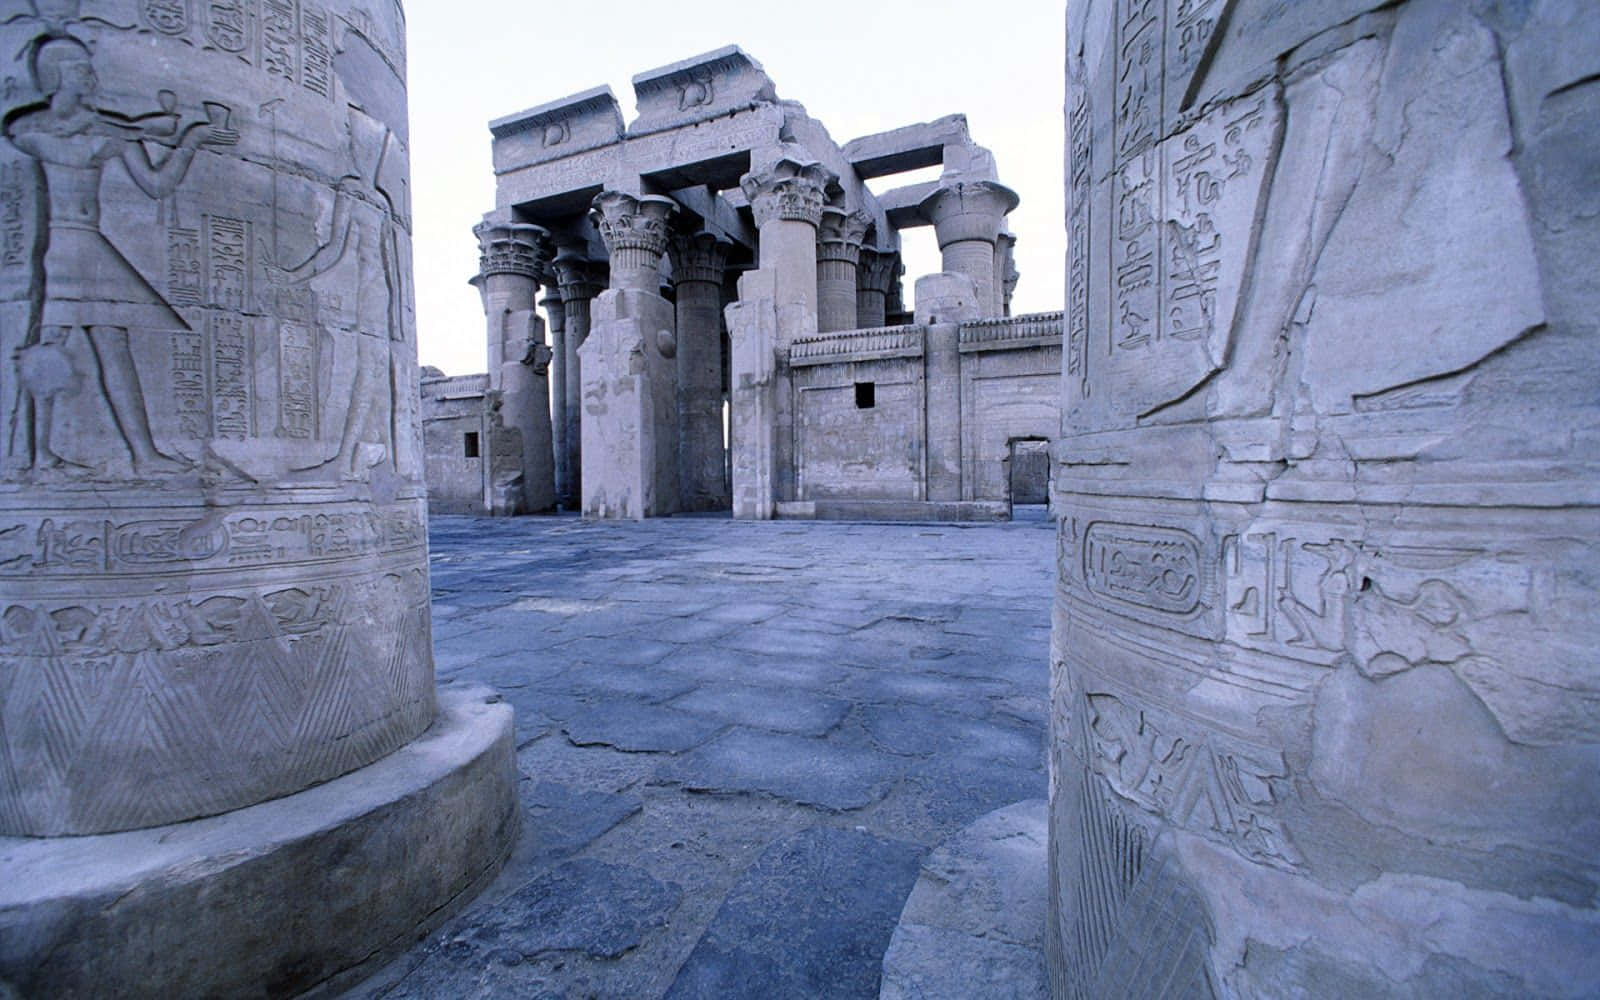 A Group Of Columns With Carvings In Them